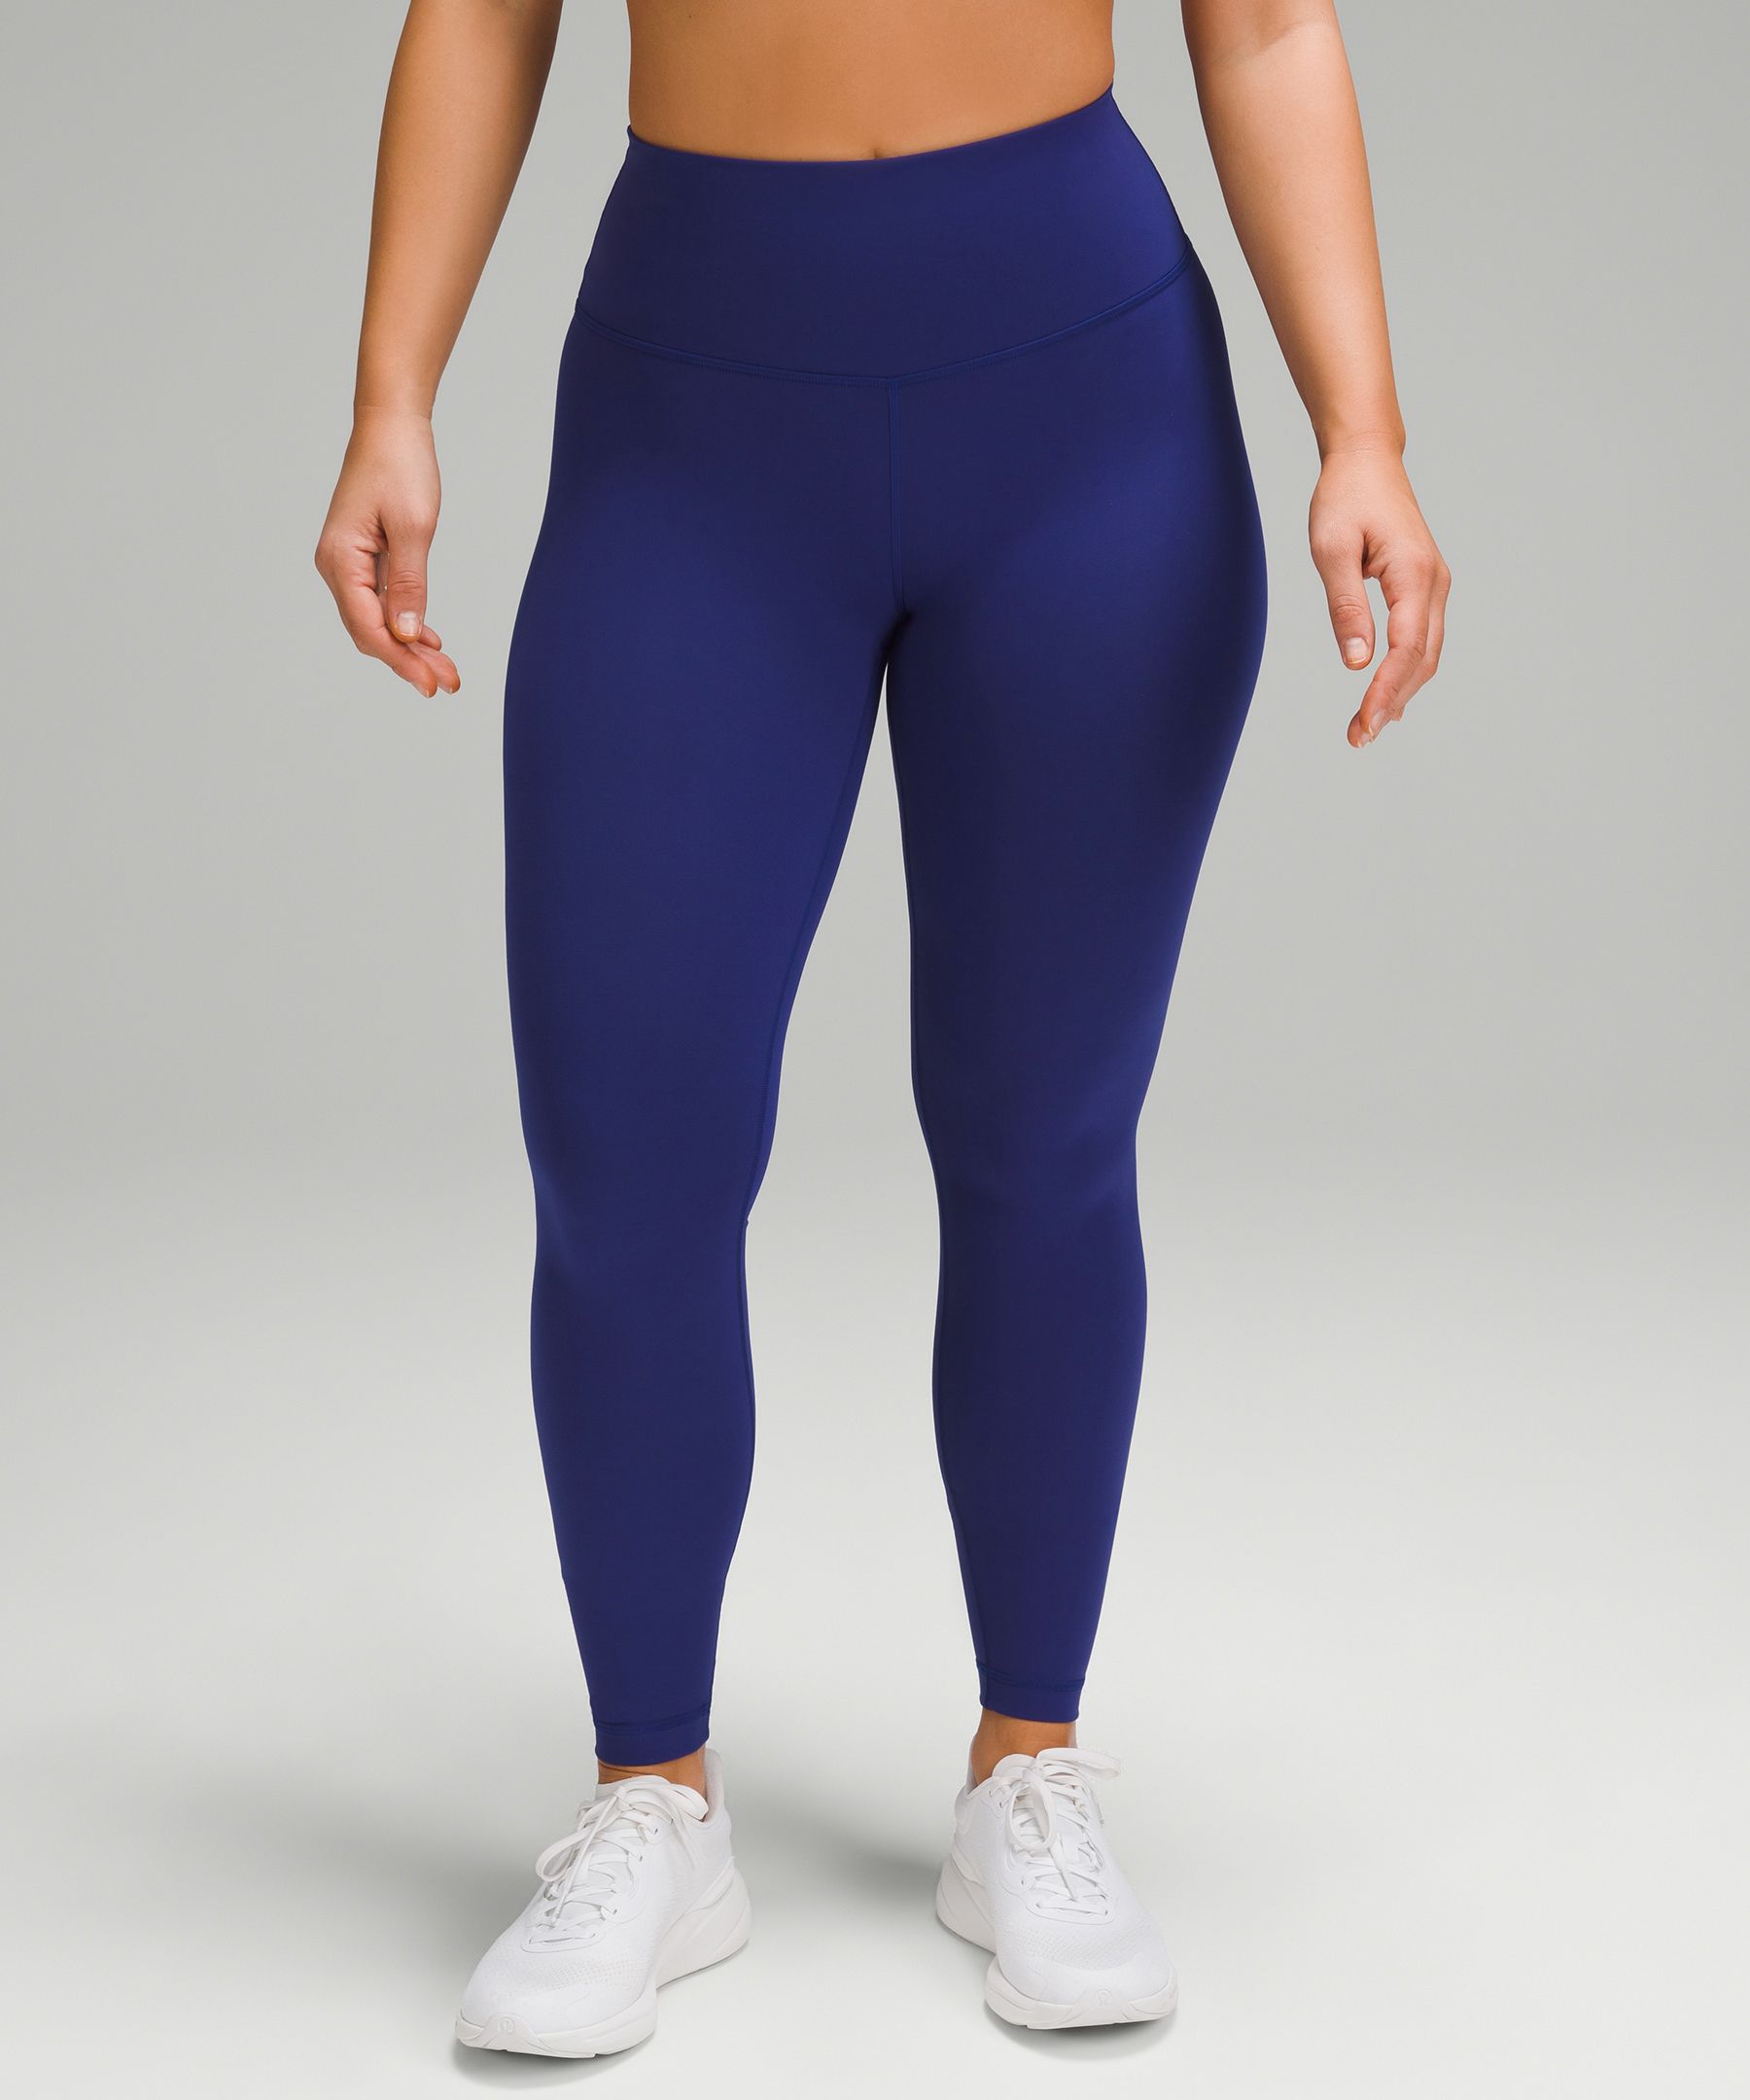 Wunder Train High-Rise Tight 28 *Contour Fit